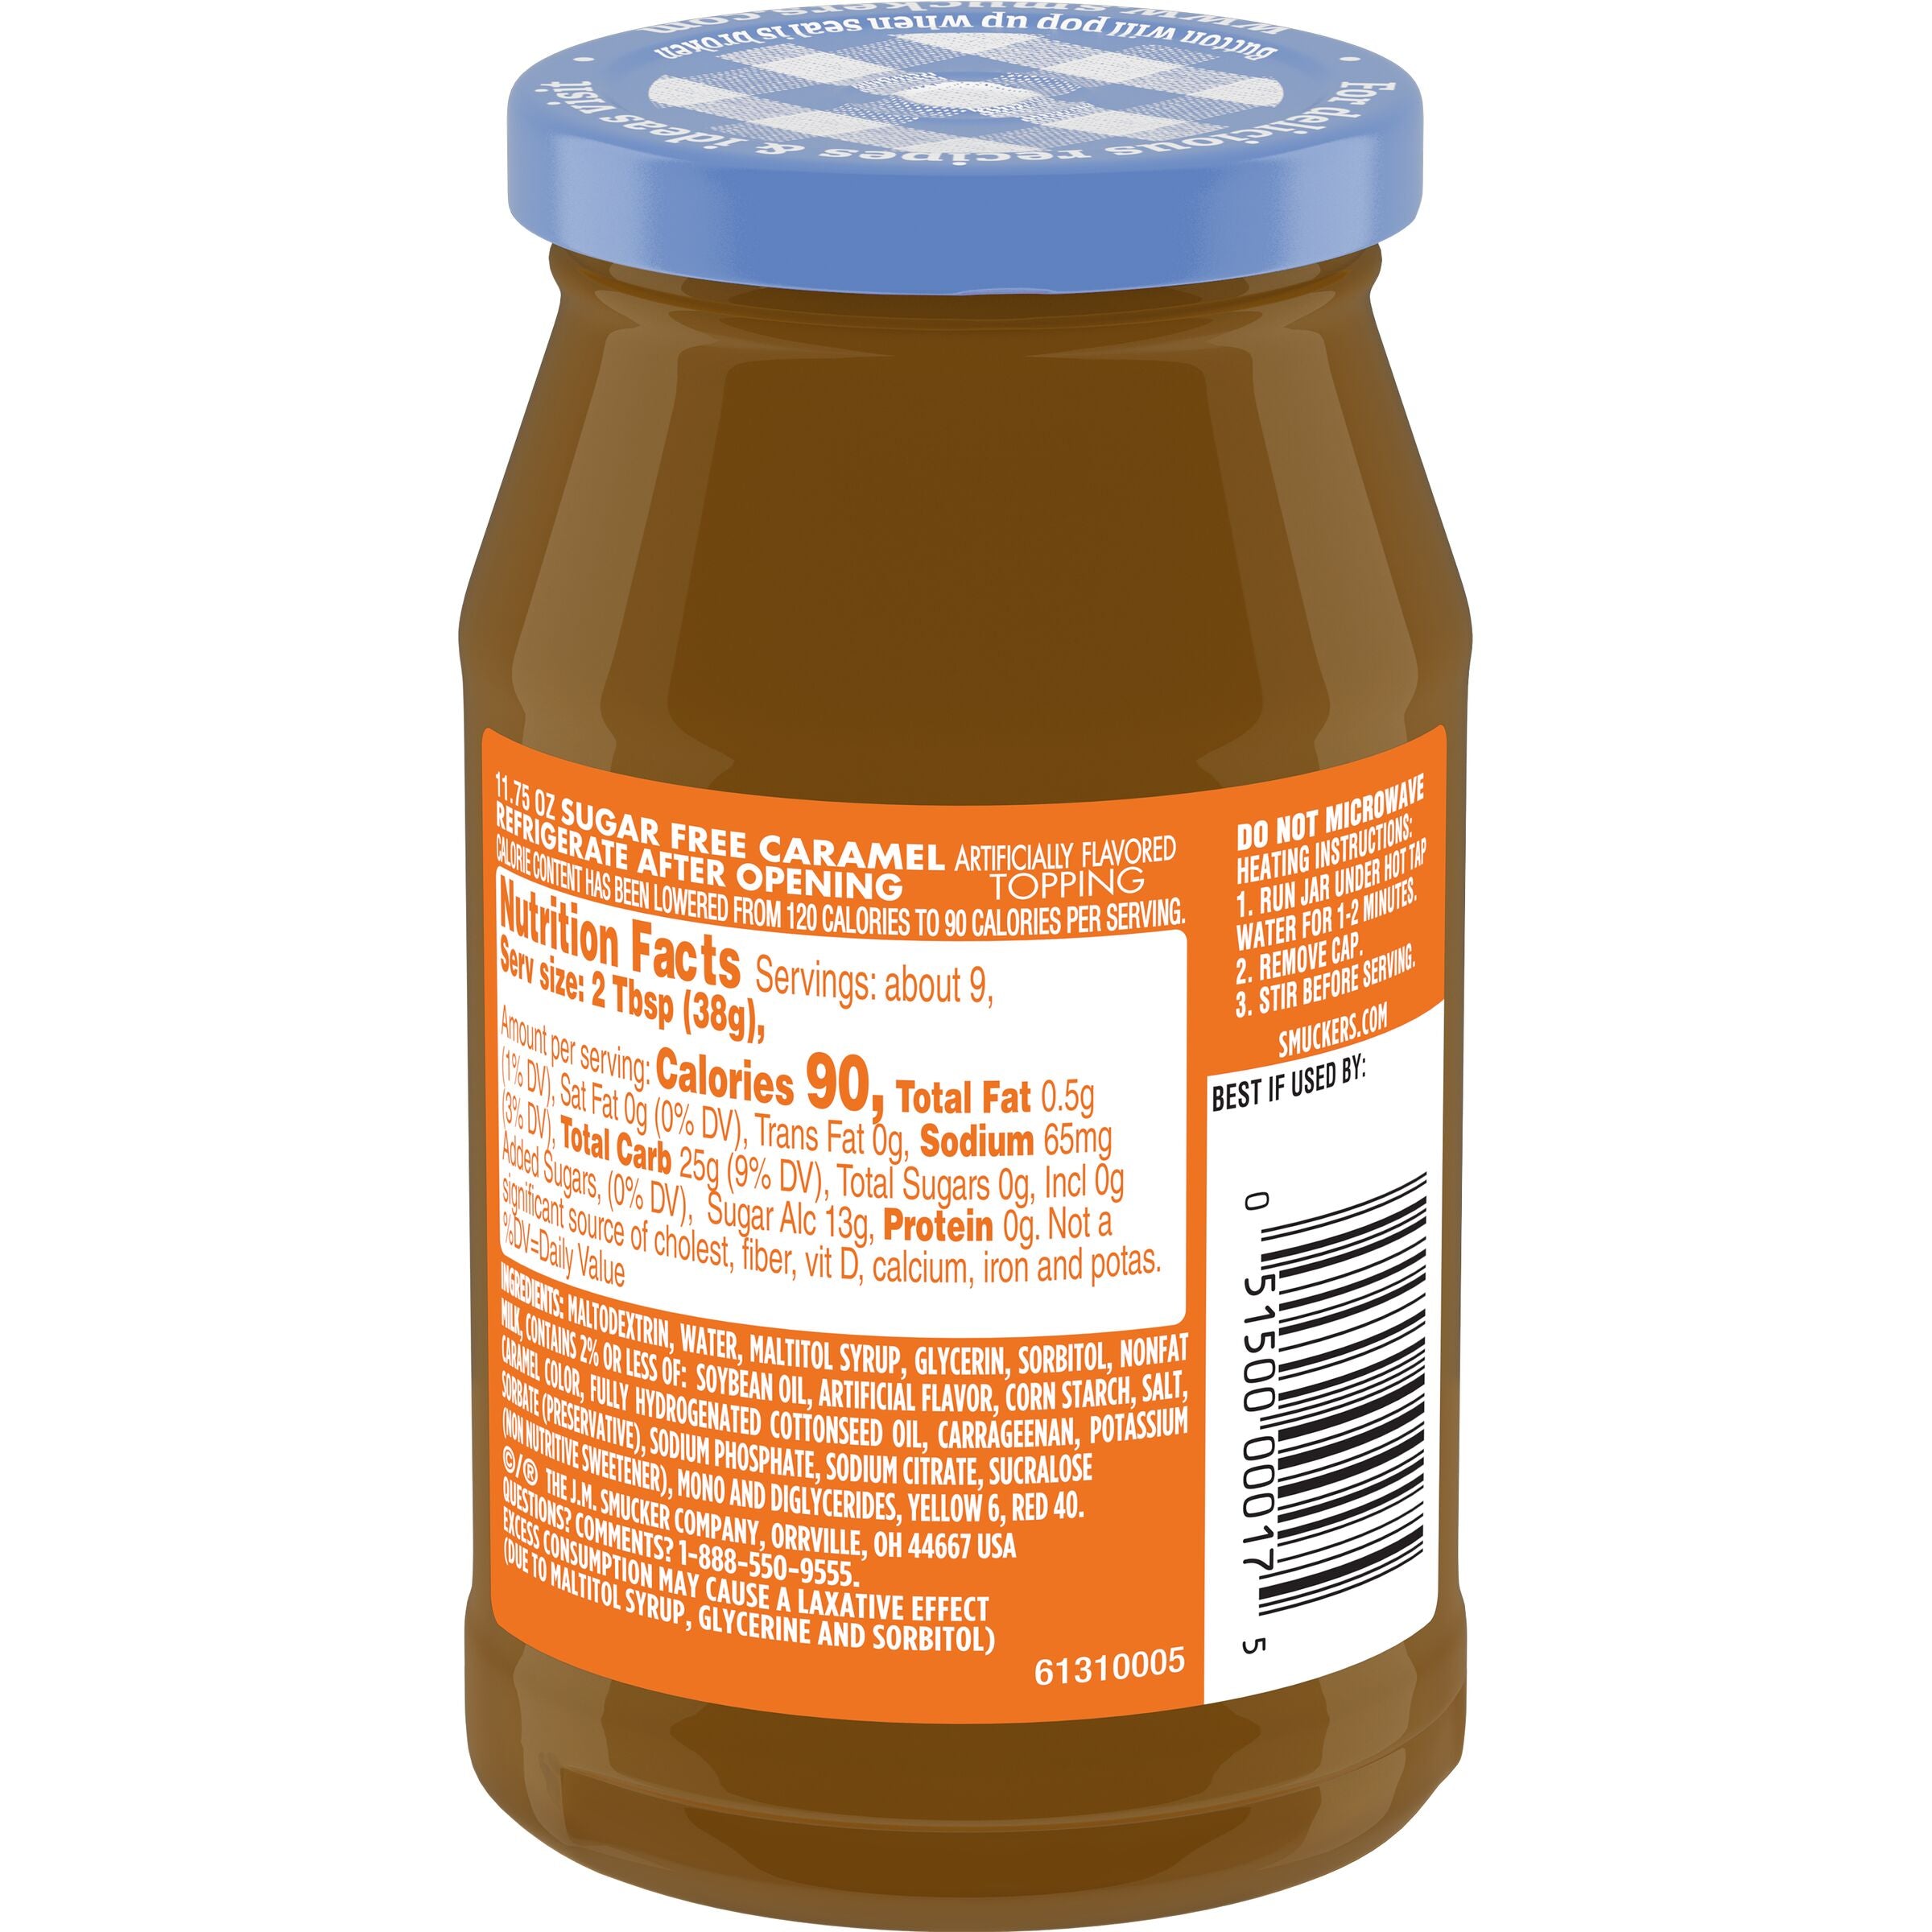 Smucker's Sugar Free Caramel Flavored Topping, 11.75 oz